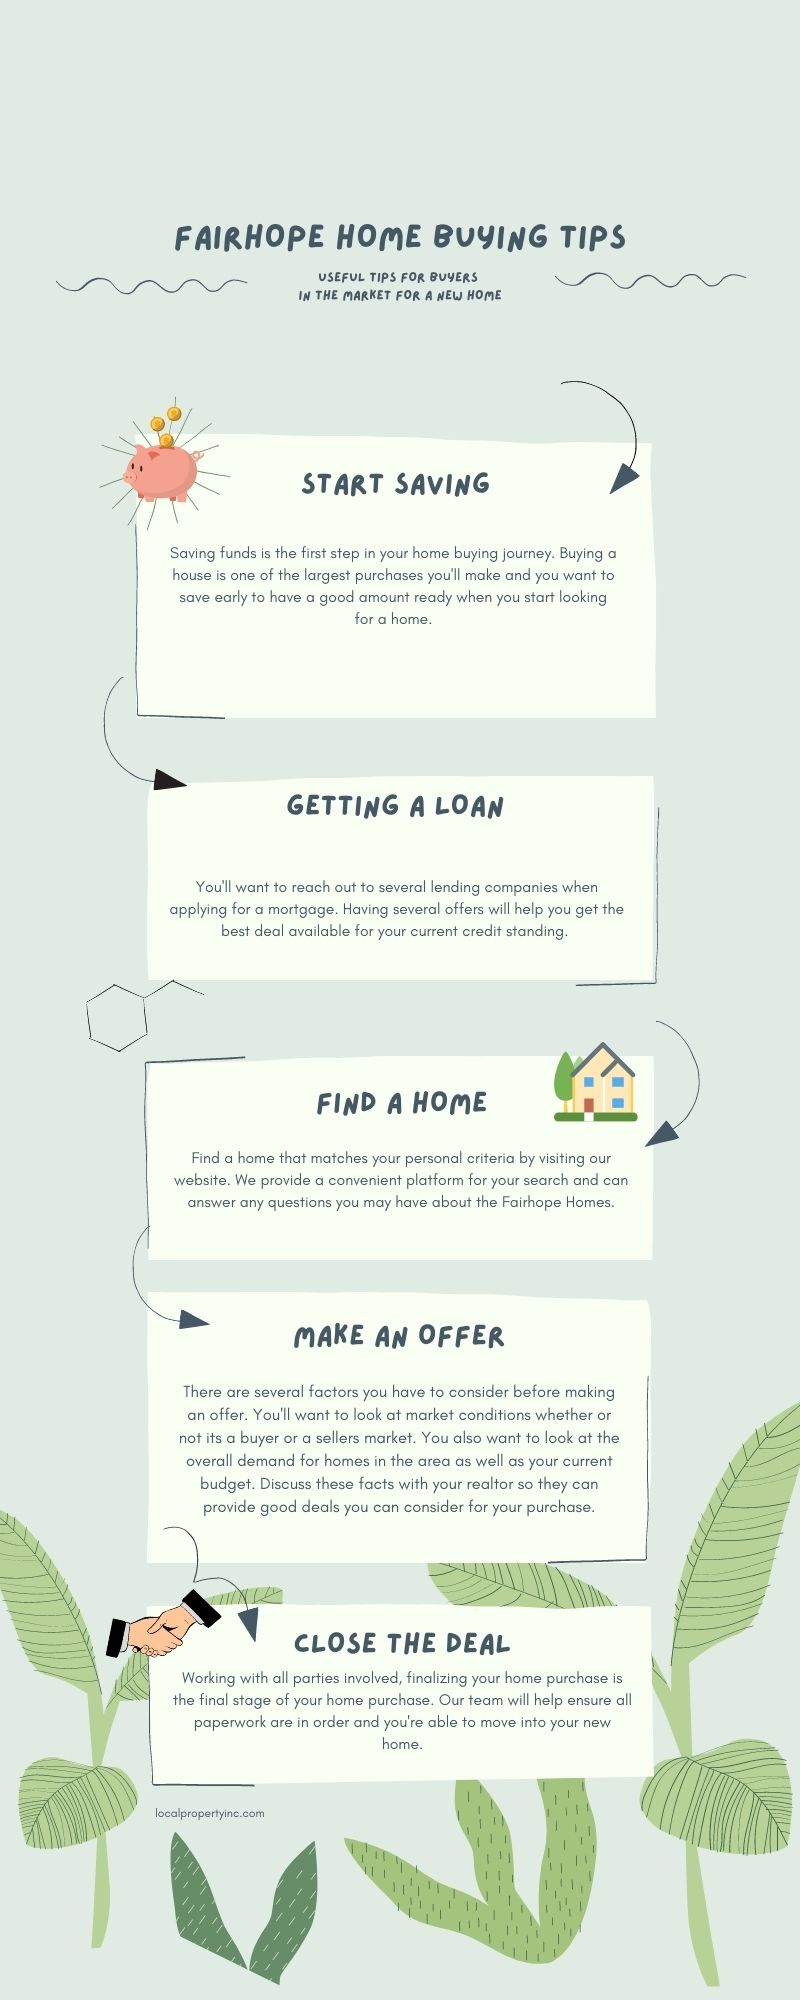 Fairhope Home Buying Tips